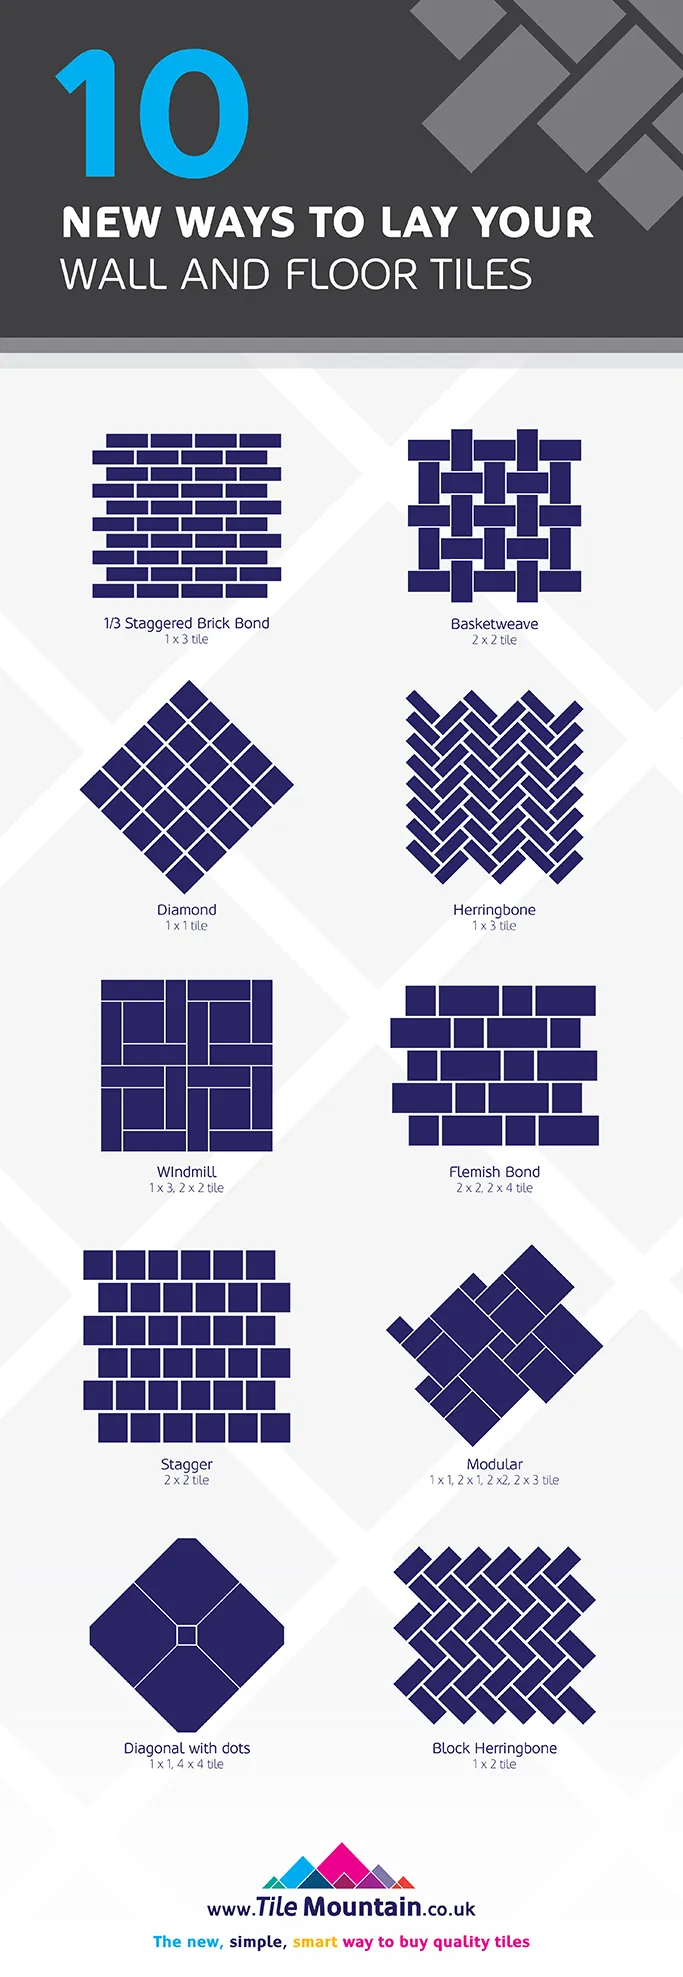 10-New-Ways-to-Lay-Your-Wall-and-Floor-Tiles-from-Tile-Mountain